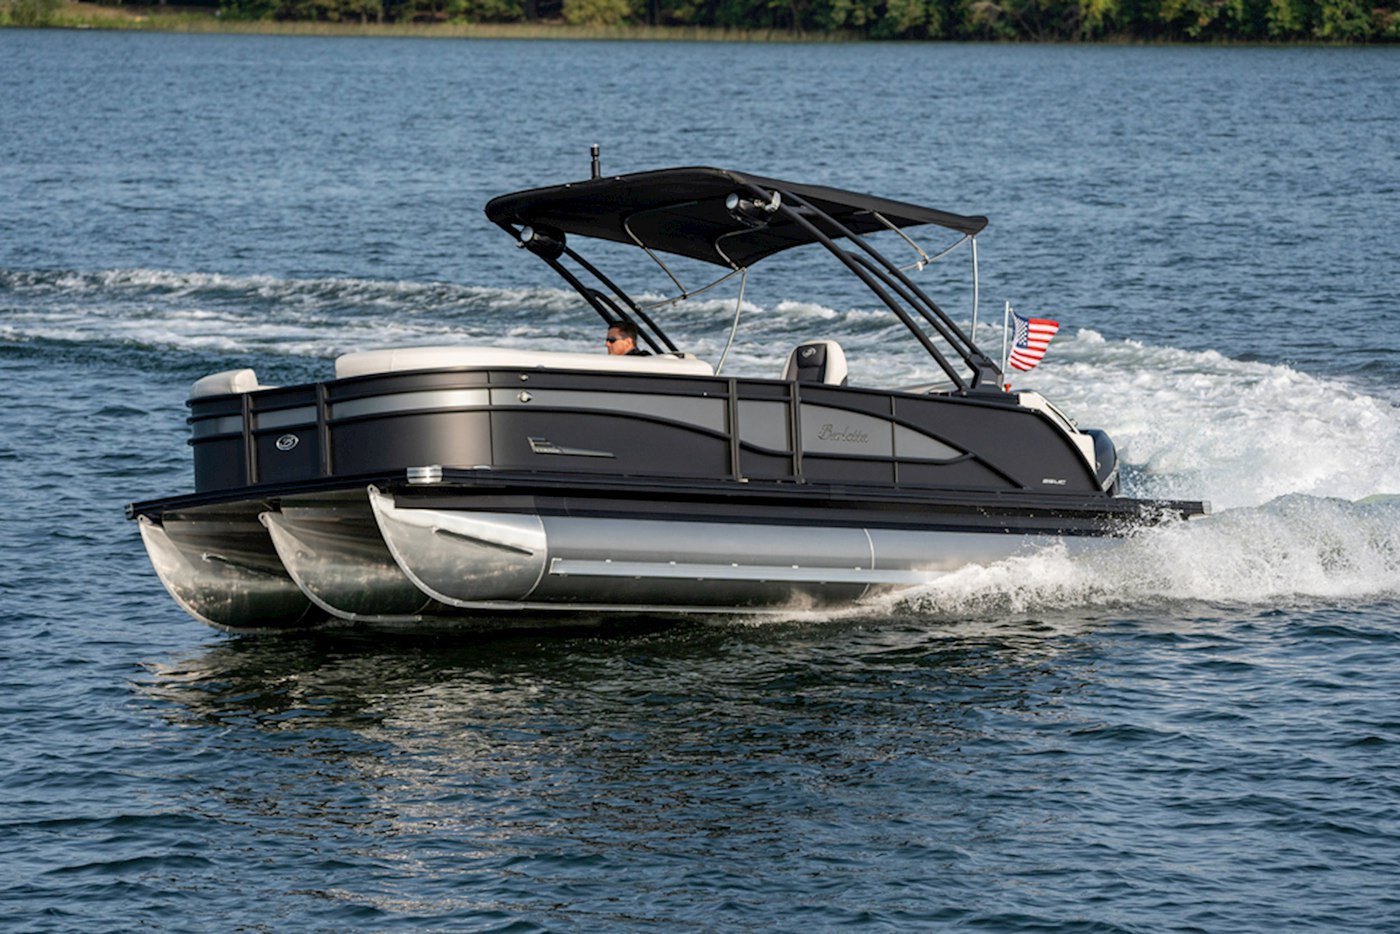 Can Pontoon Boats Handle Rough Water?